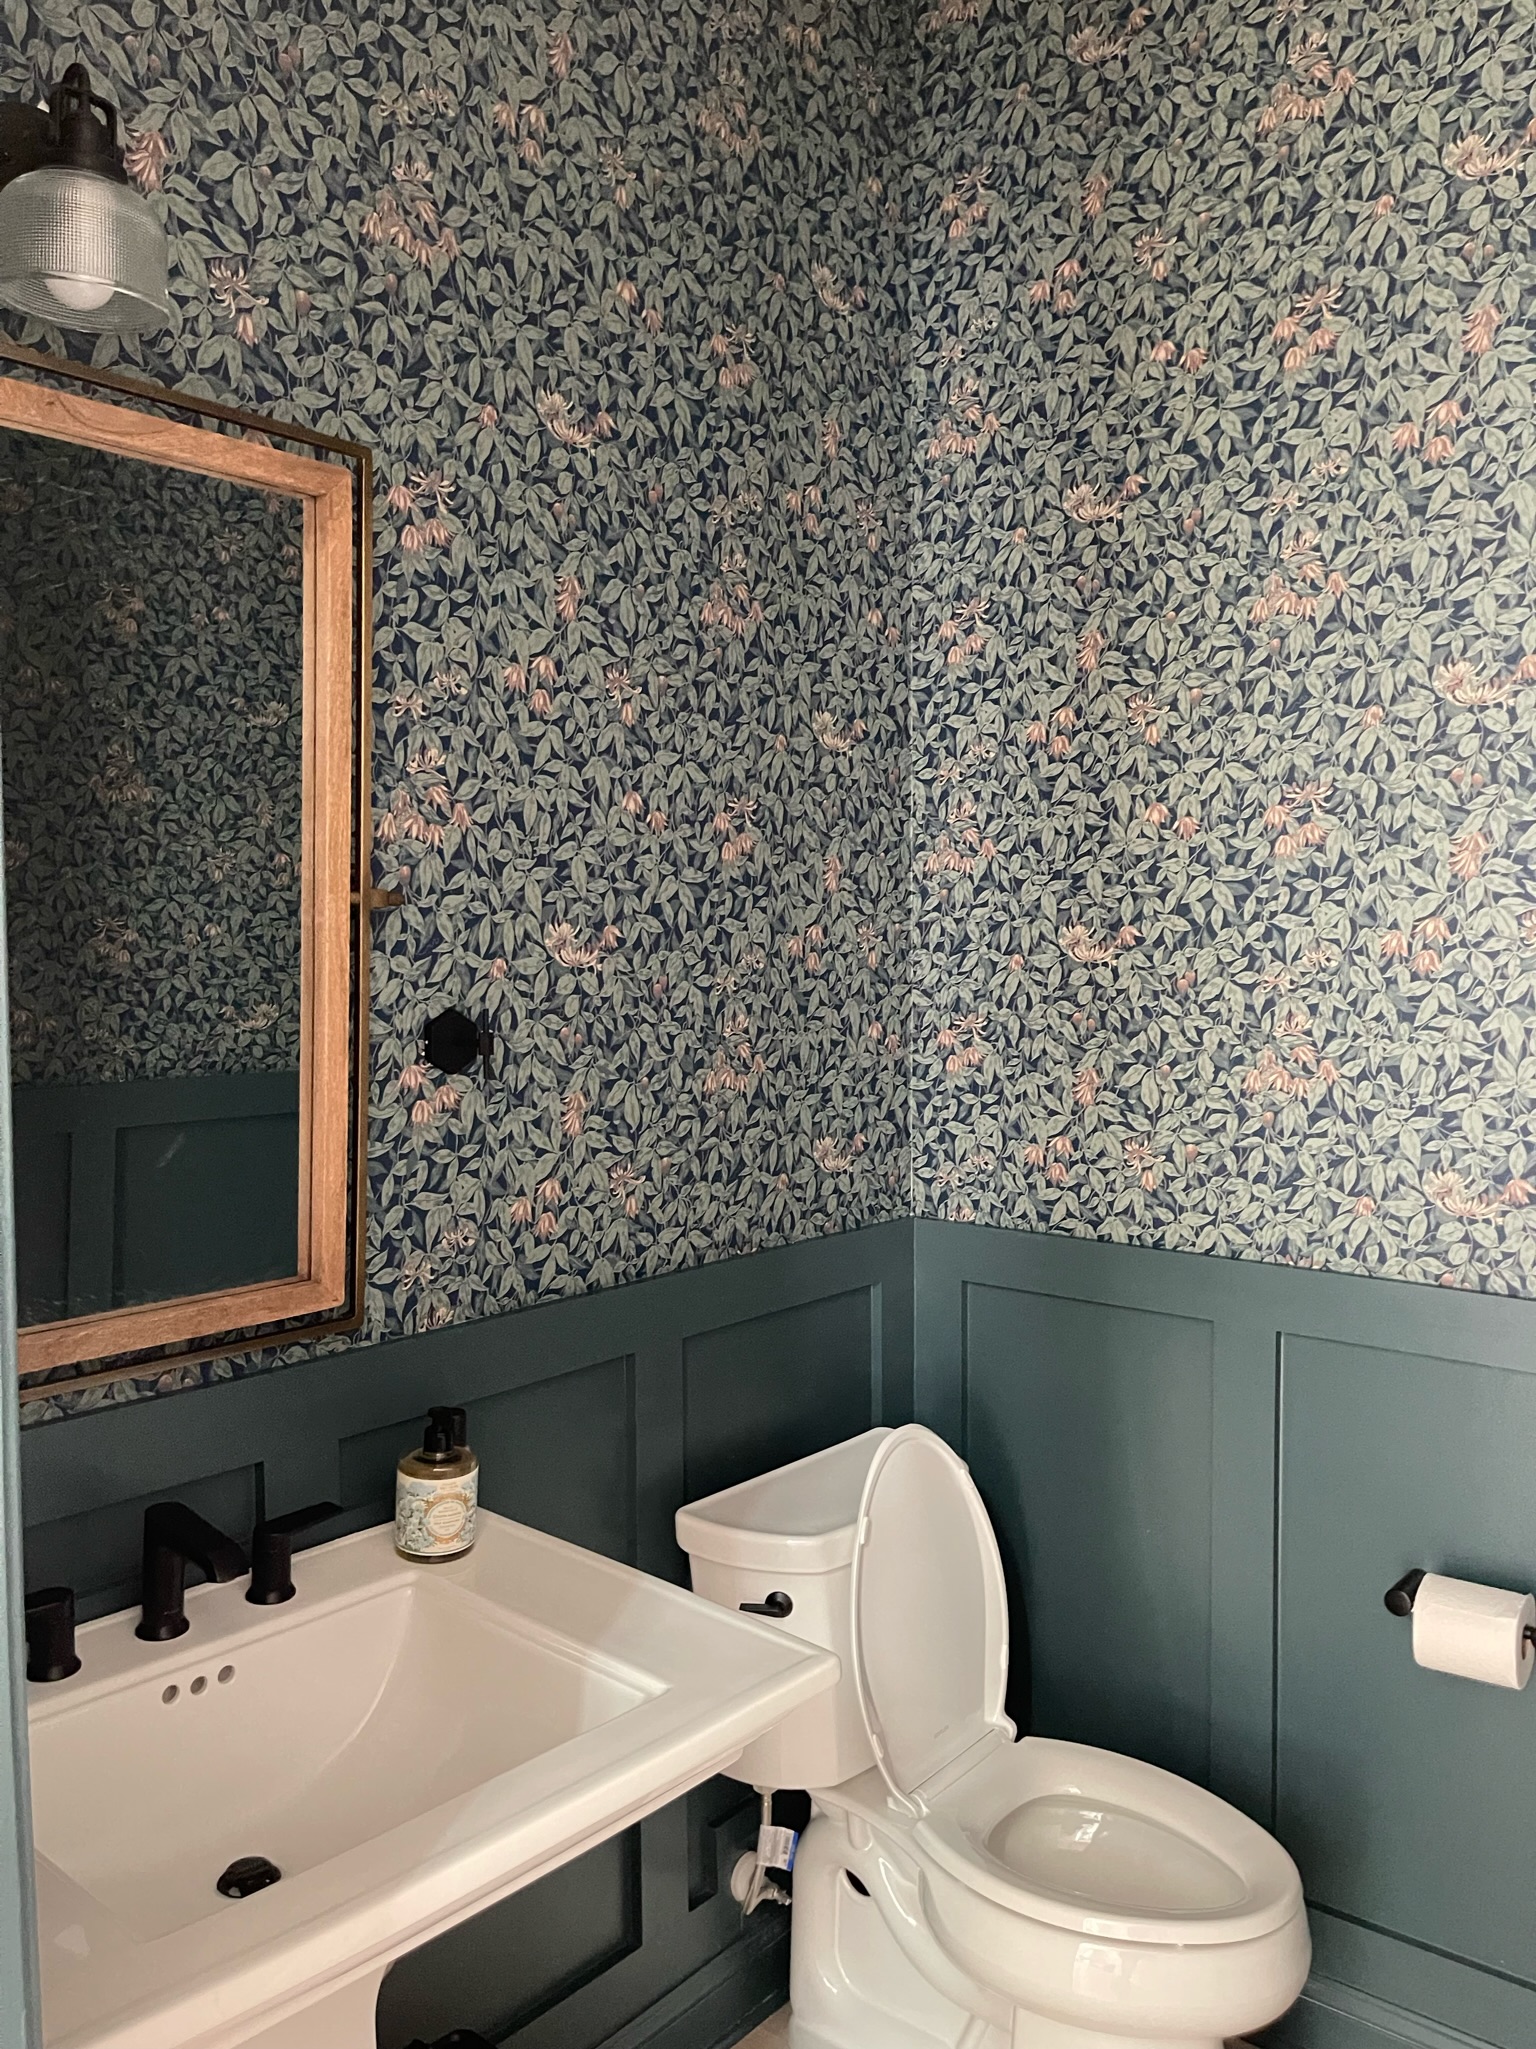 This bathroom has wood paneling halfway up the walls that is painted a dark blue . The other half of the wall uses a printed wallpaper that matches the blue wall below. 